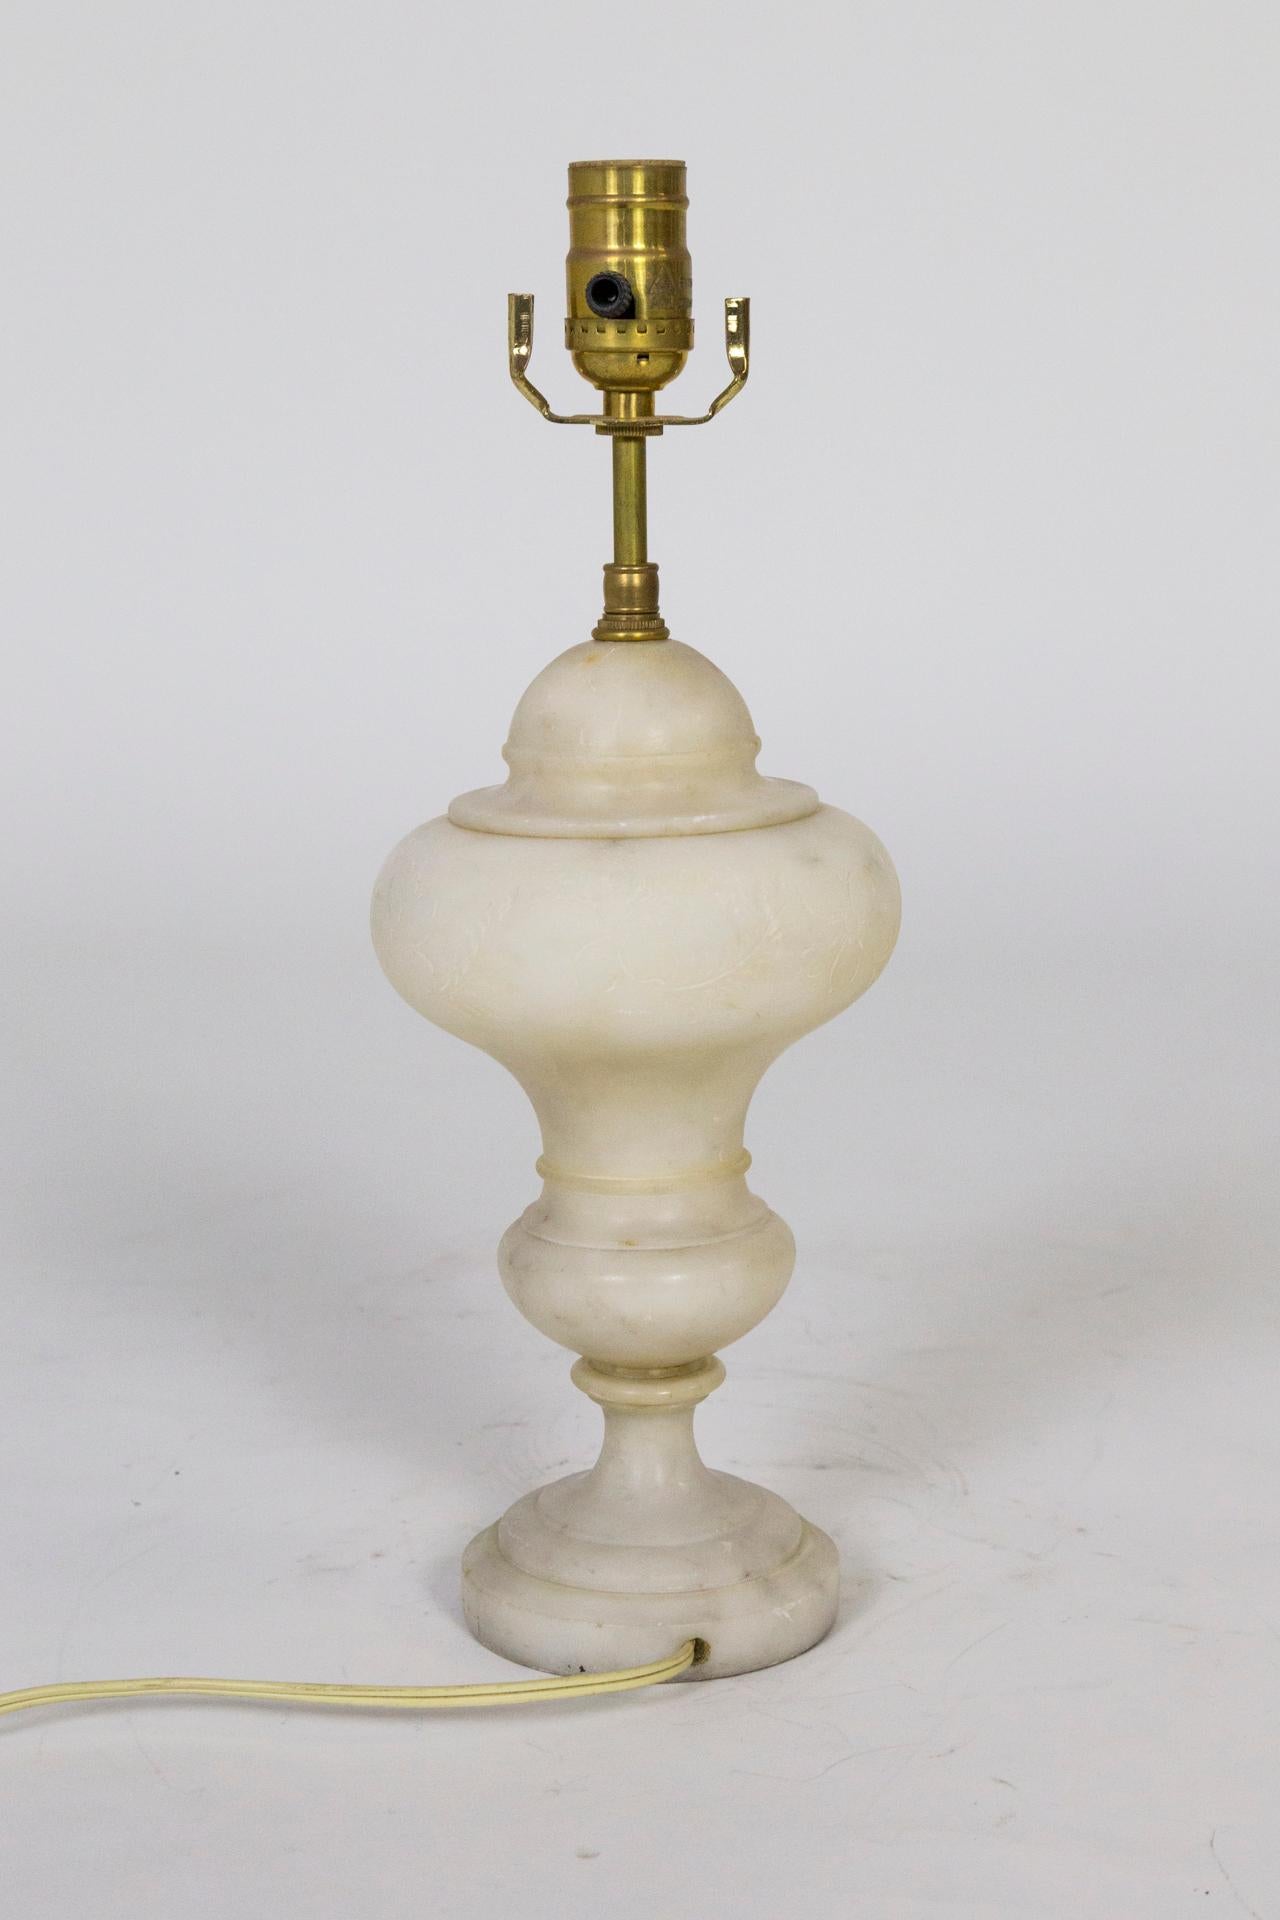 An alabaster, urn shaped lamp with subtle, simple, carved line flowers. An elegant piece, small in size - very nice for an end table or bedside table. Measures: 16